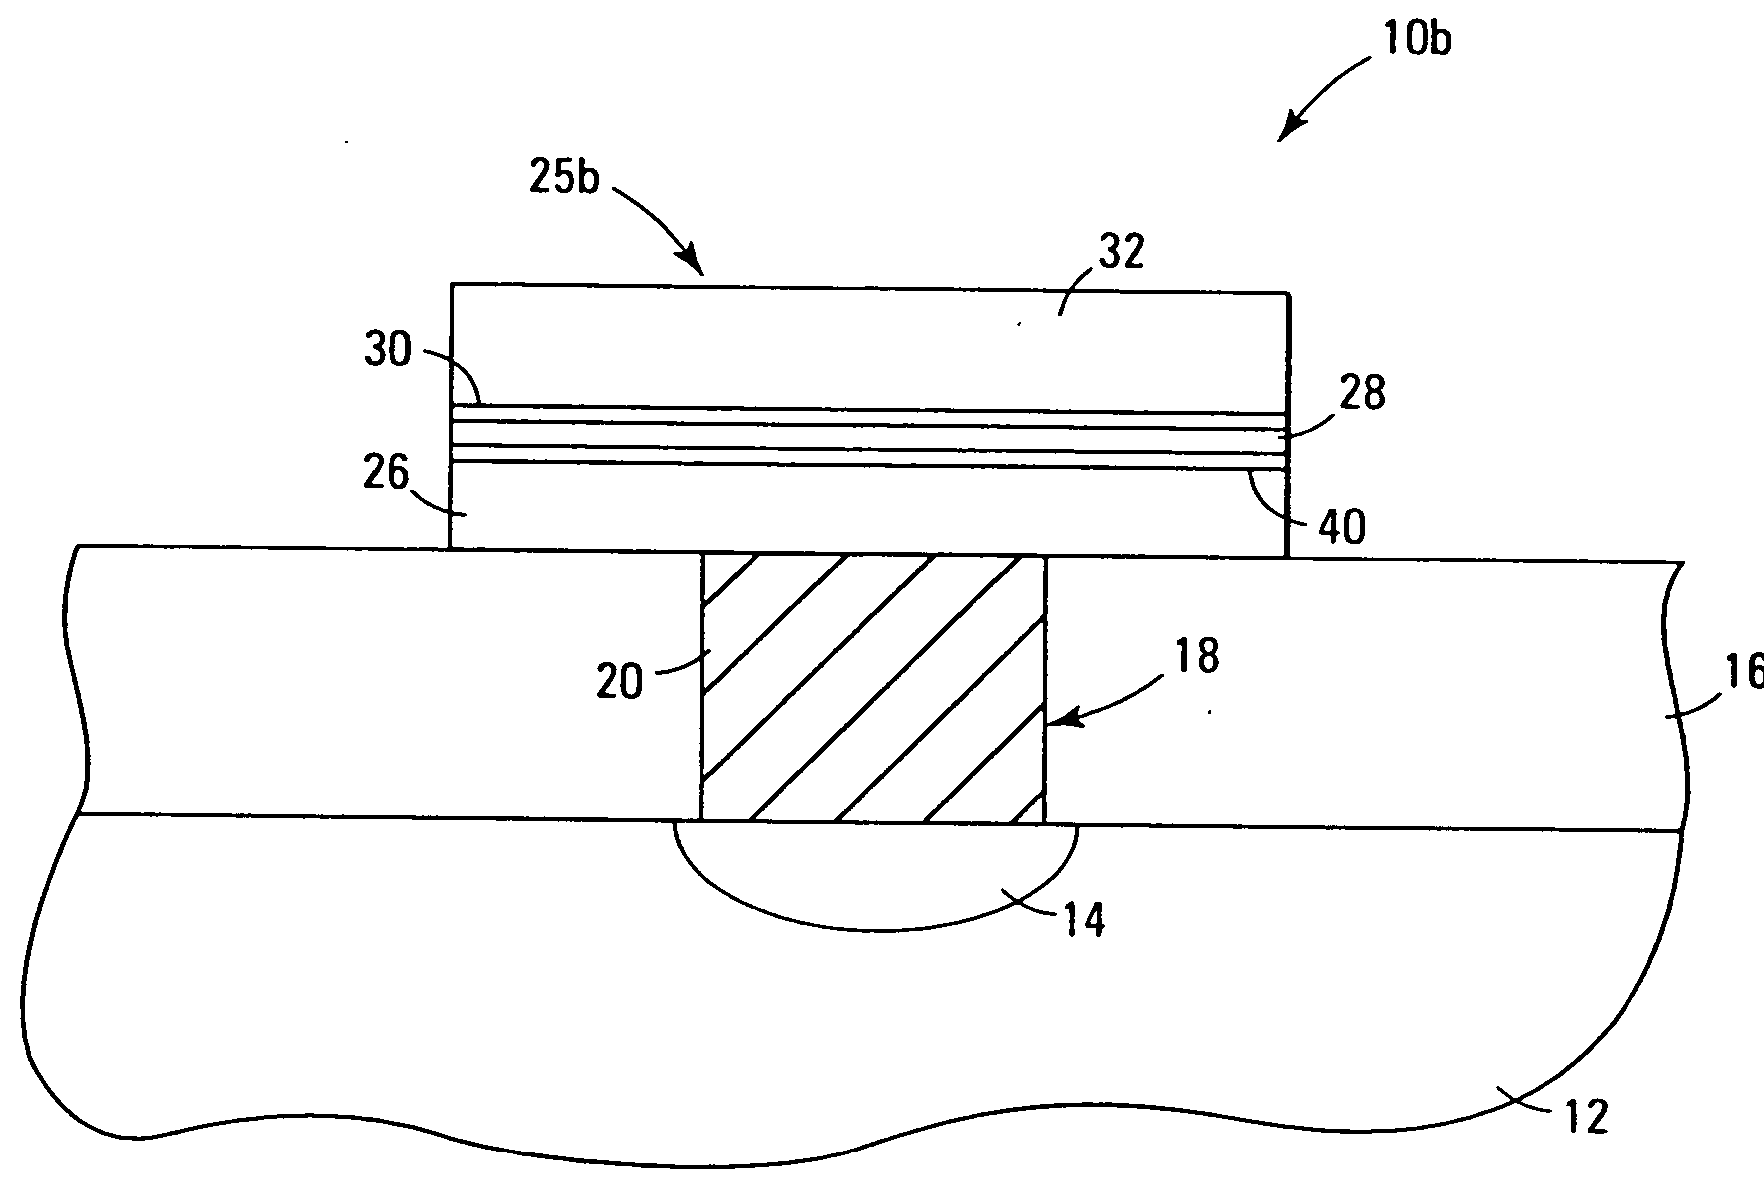 Systems and methods for forming tantalum oxide layers and tantalum precursor compounds